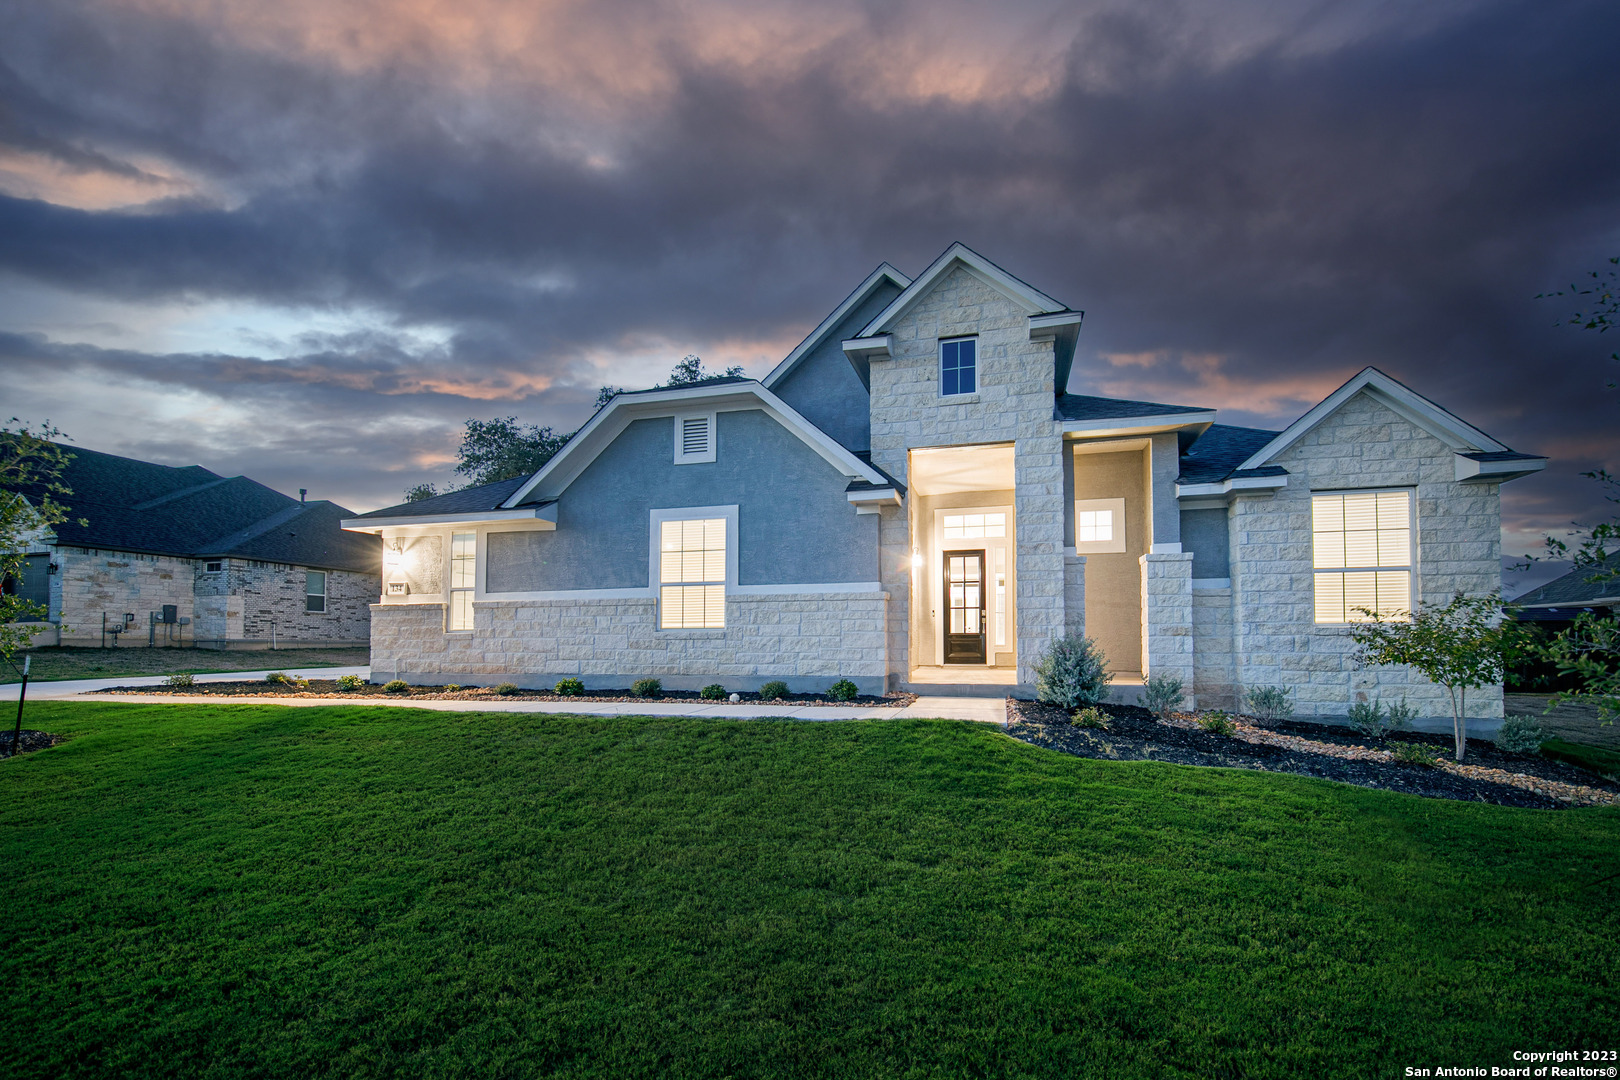 Photo of 134 Moon Ln in Castroville, TX